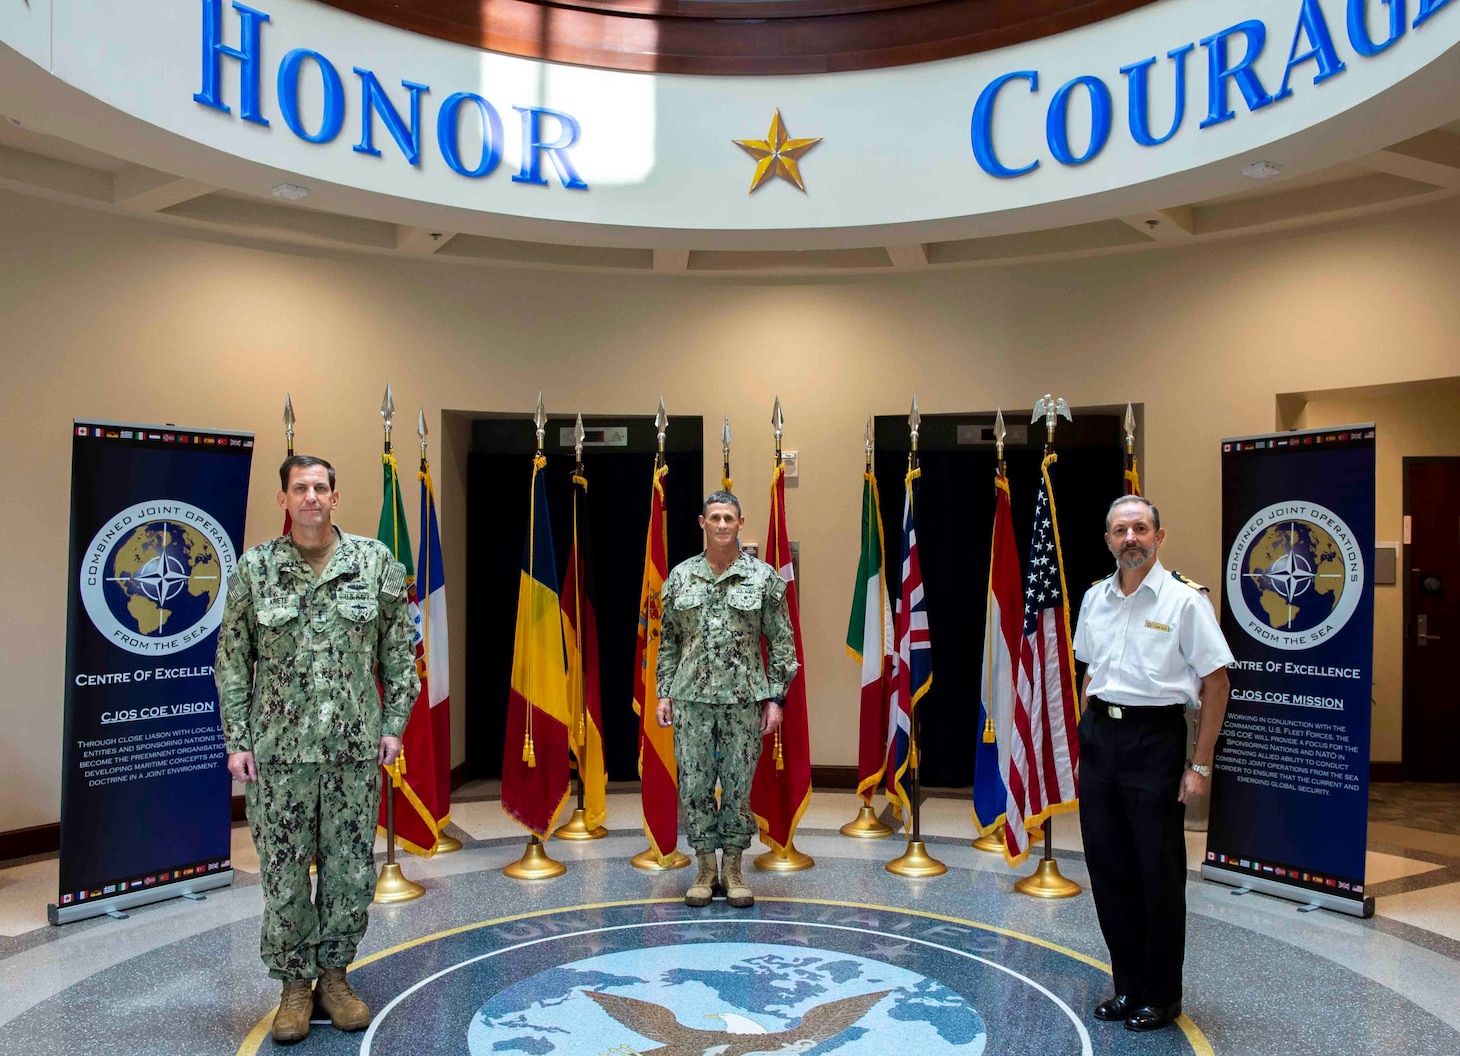 Vice Adm. Dave Kriete, outgoing director, Combined Joint Operations from the Sea Center of Excellence (CJOS COE), left, Vice Adm. Andrew Lewis, oncoming director, CJOS COE, center, and Royal Navy Commodore Thomas Guy, deputy director CJOS COE, participated in a ceremonial photograph in support of the transition of directorship from deputy commander, U.S. Fleet Forces Command to Commander, U.S. 2nd Fleet.